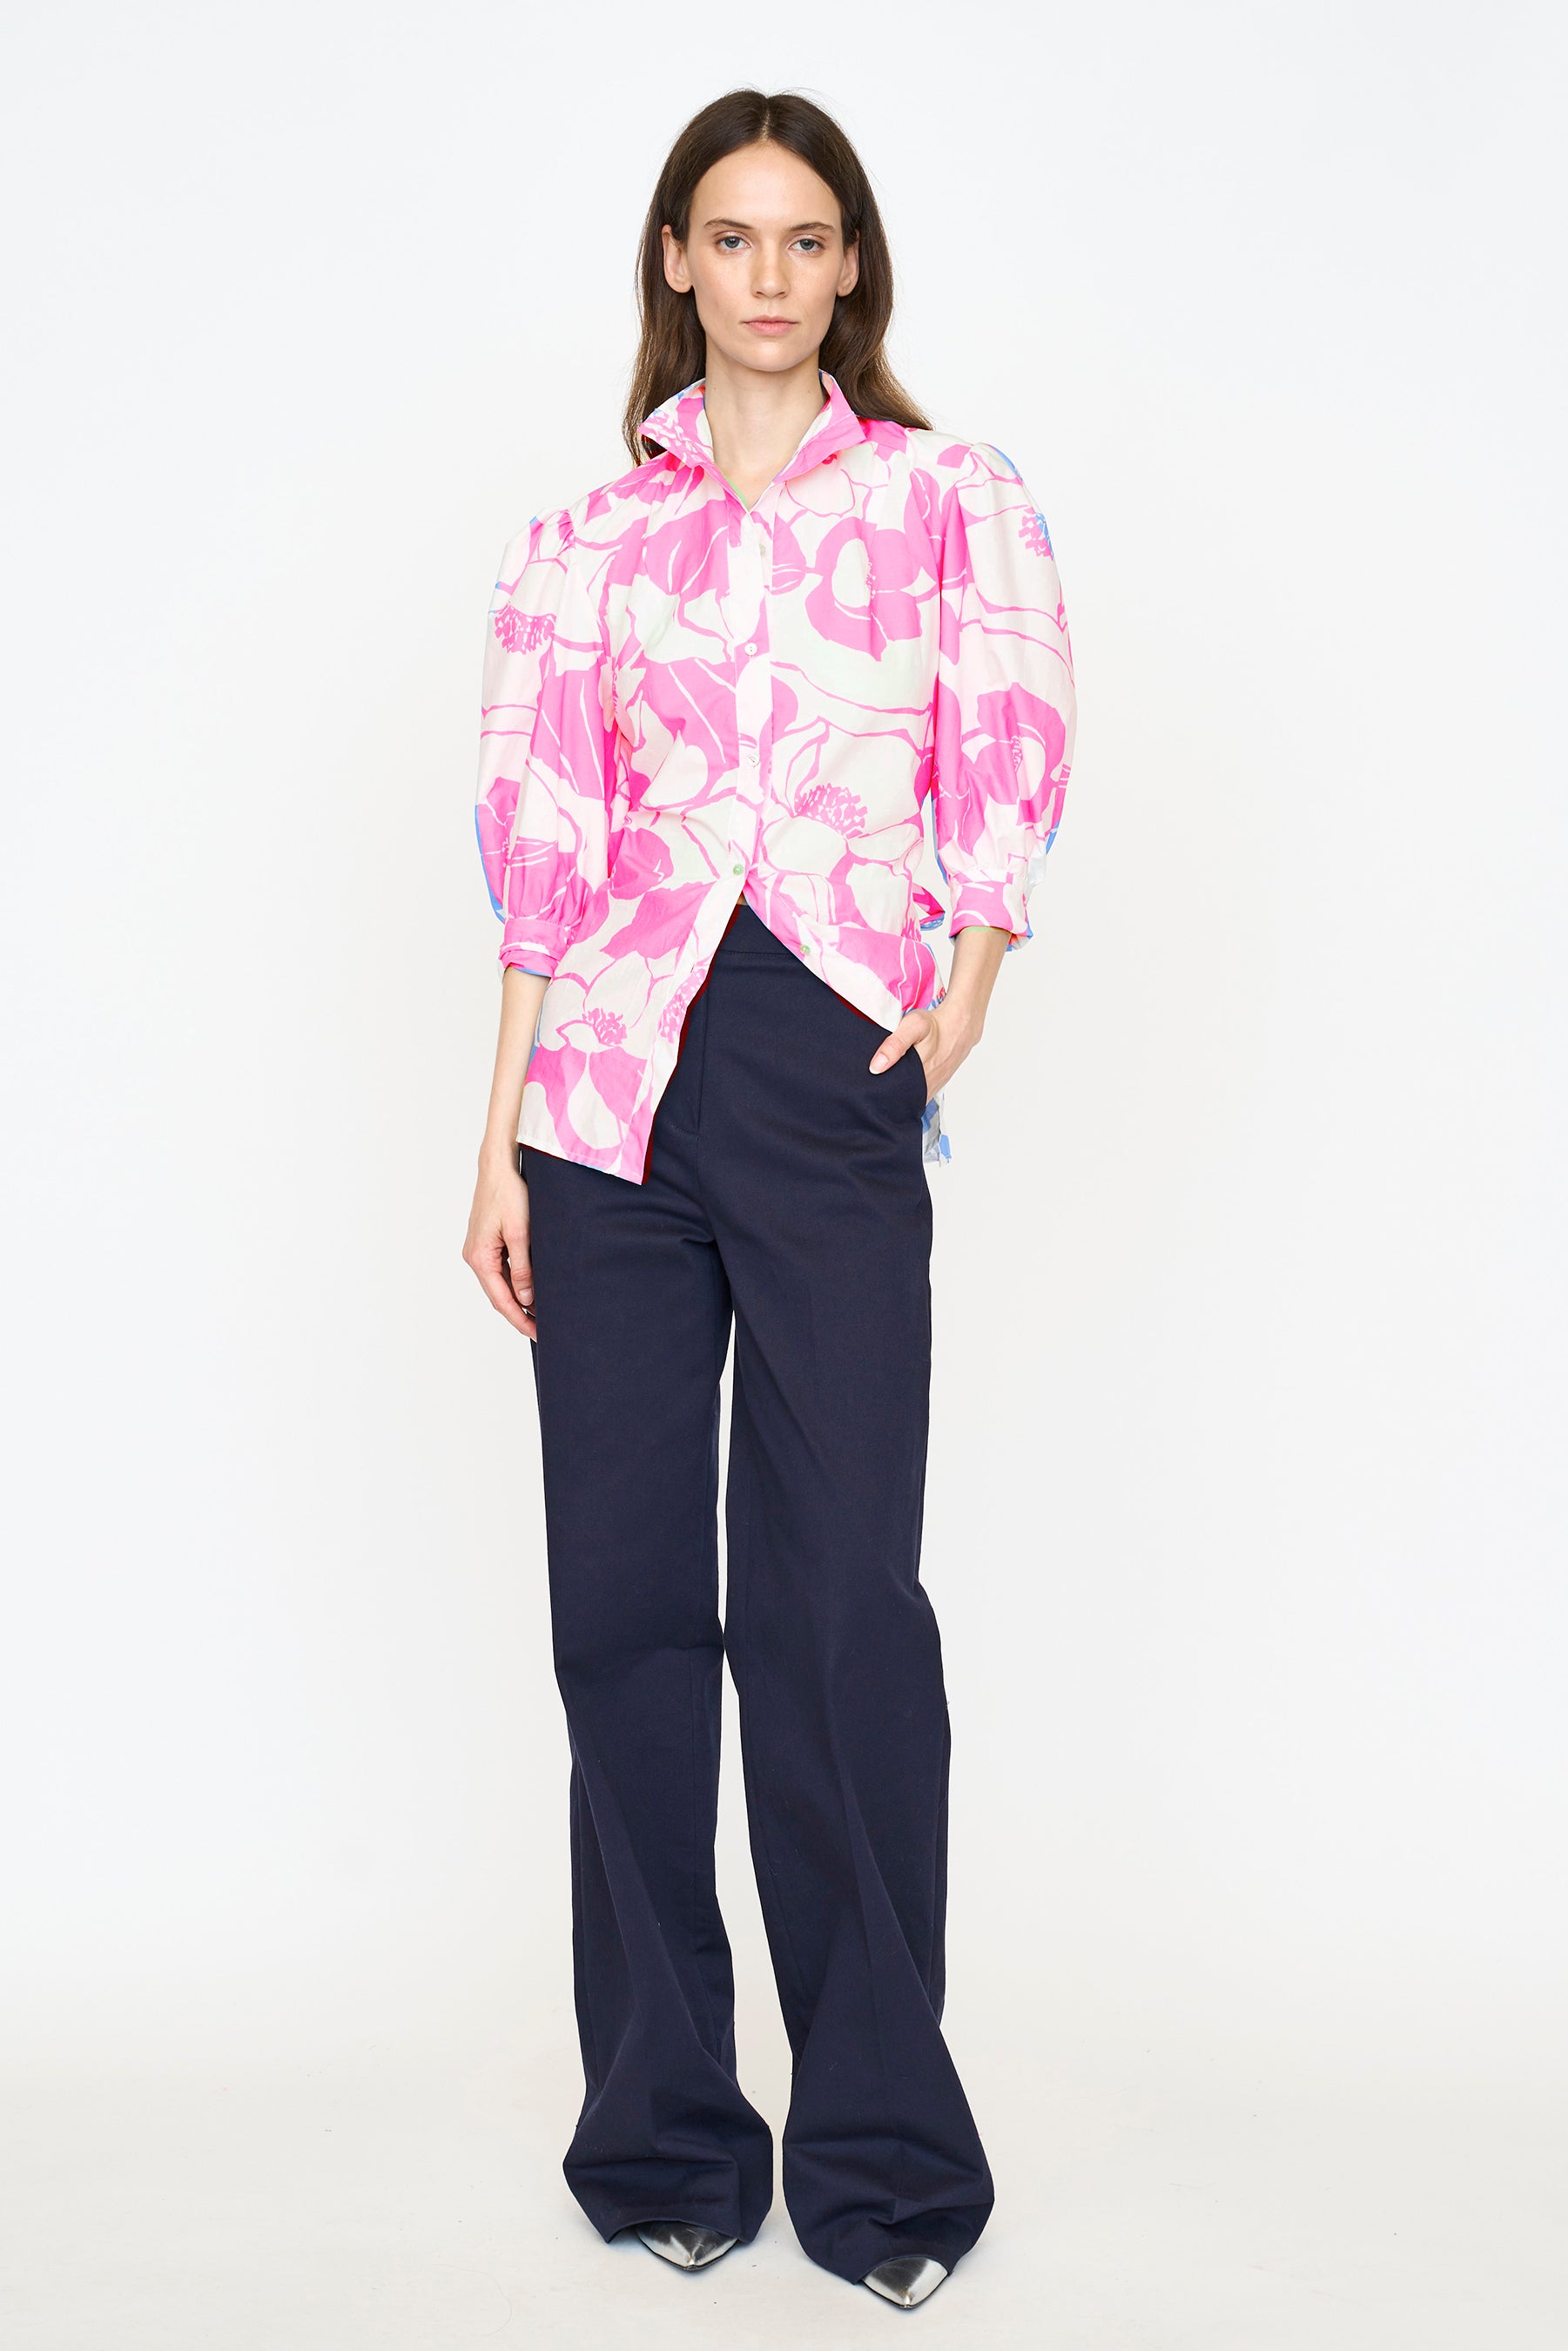 Maisy Top - Pink Chelsea Floral